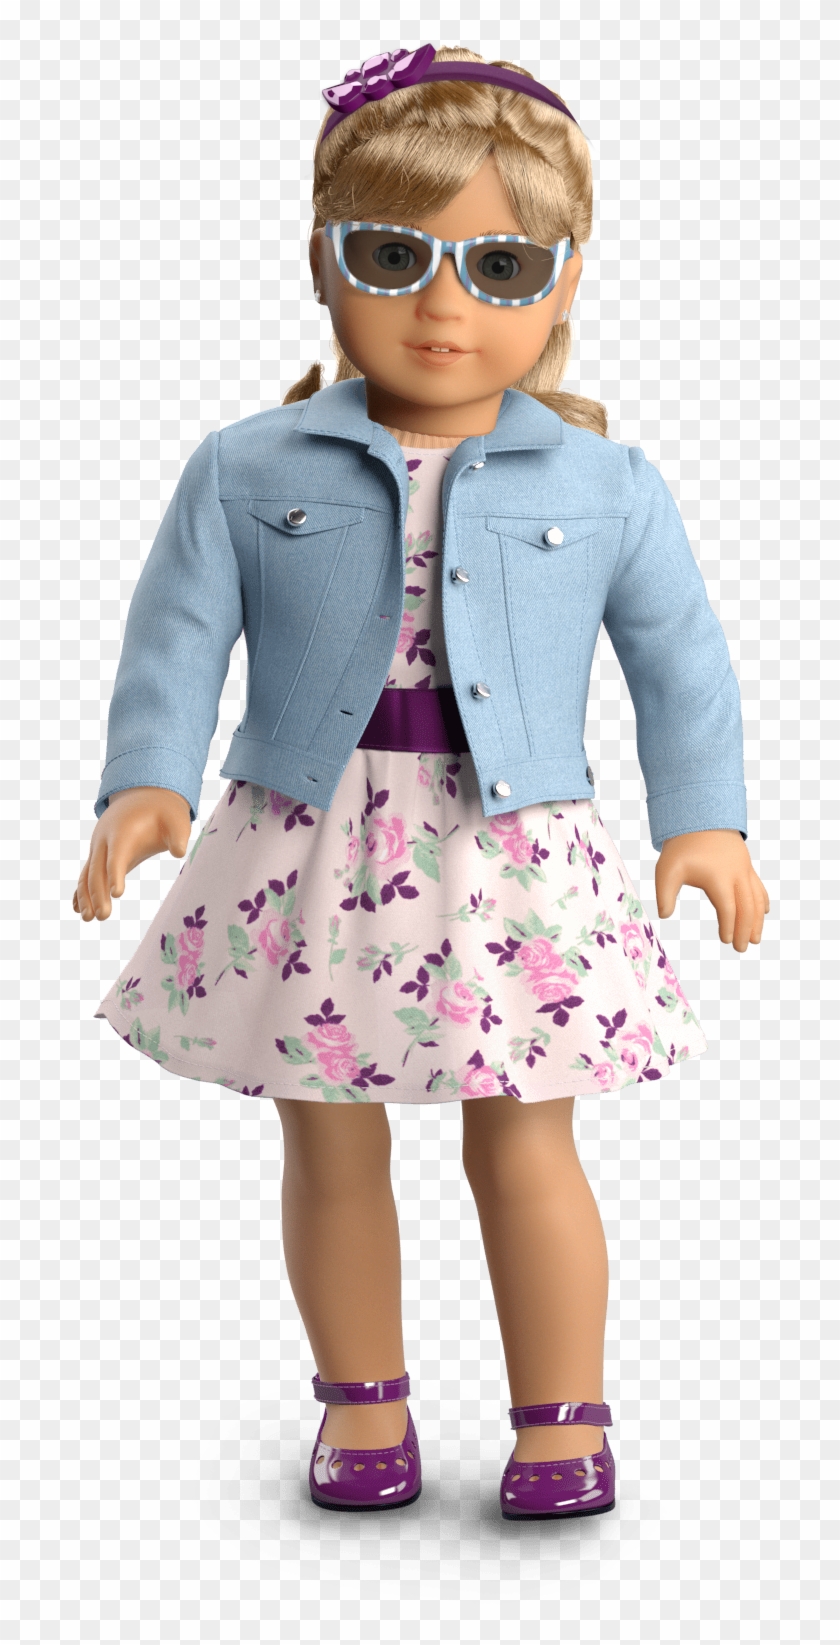 American Girl Create Your Own - Eliza American Girl Doll Clipart #5271133